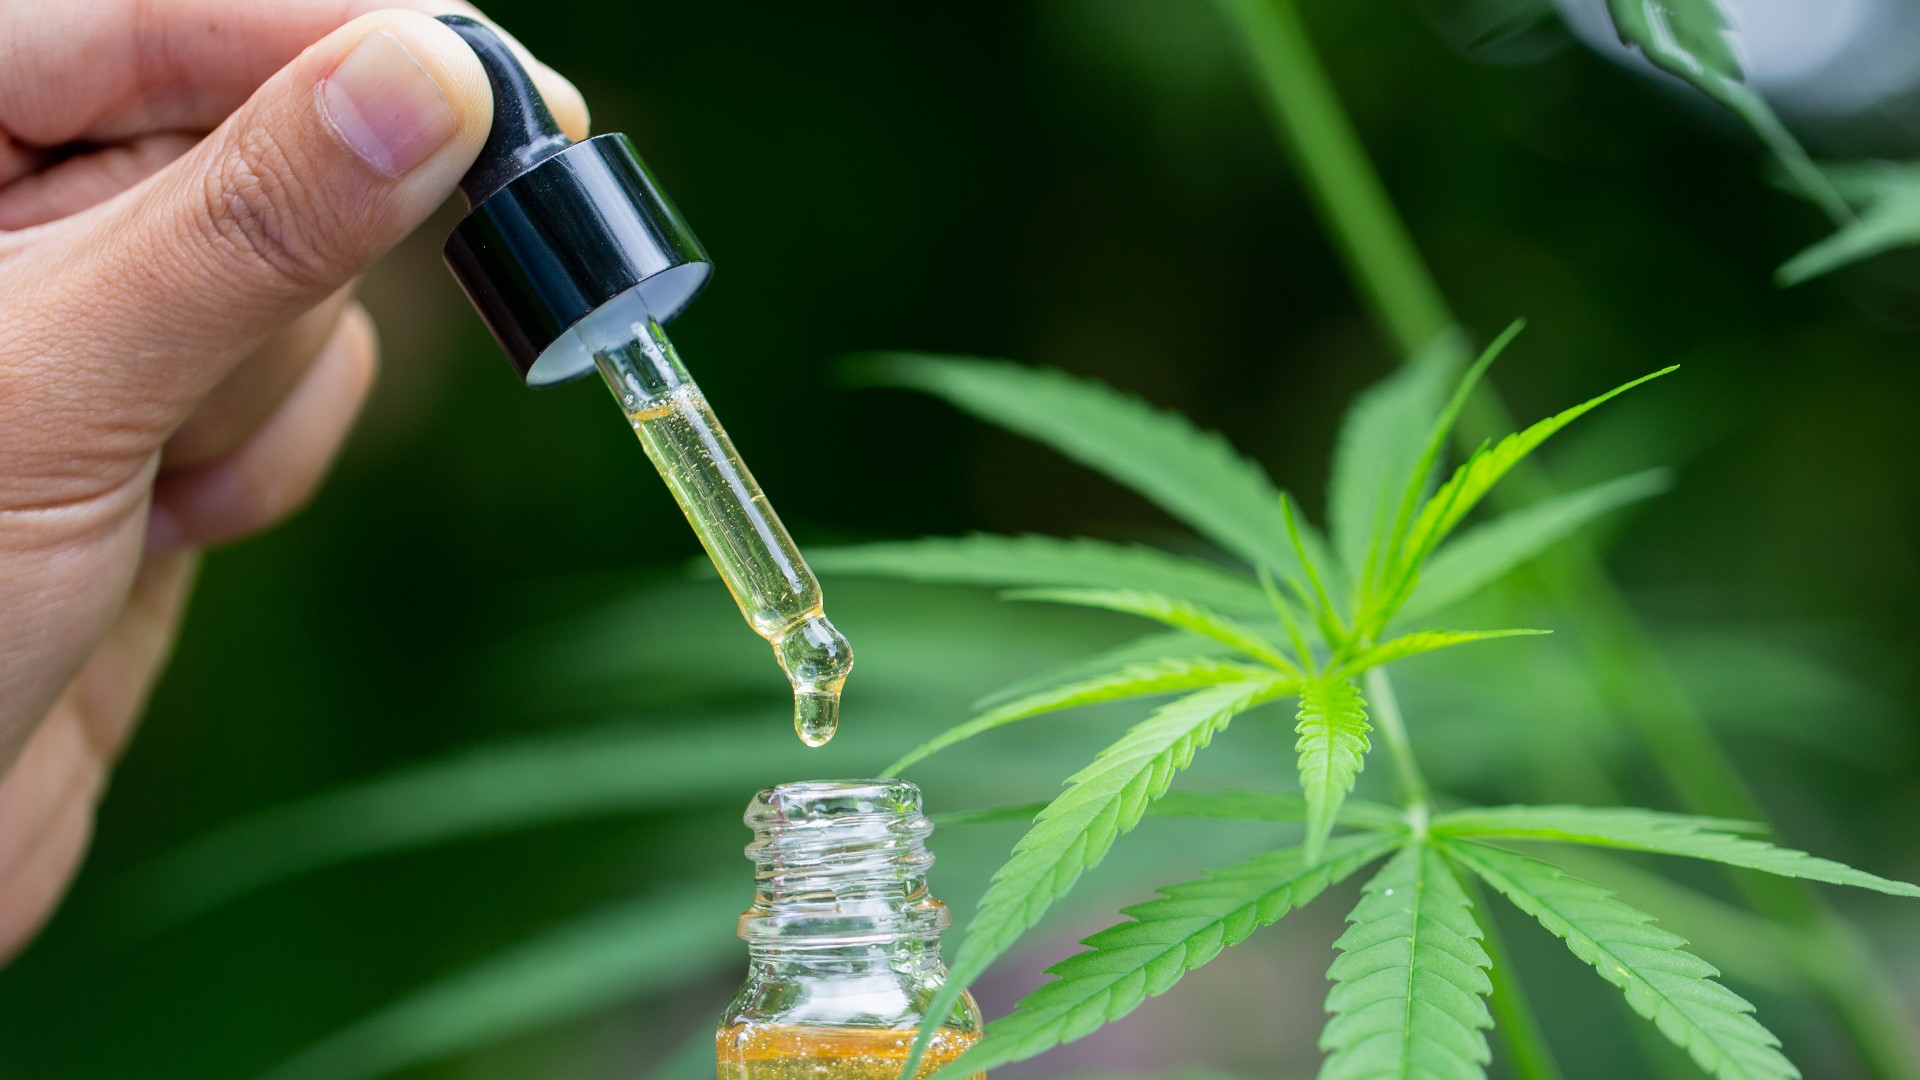 Too few published clinical studies exist on the safety and effectiveness of cannabidiol oils at this time. https://kare11.tv/340UO5k